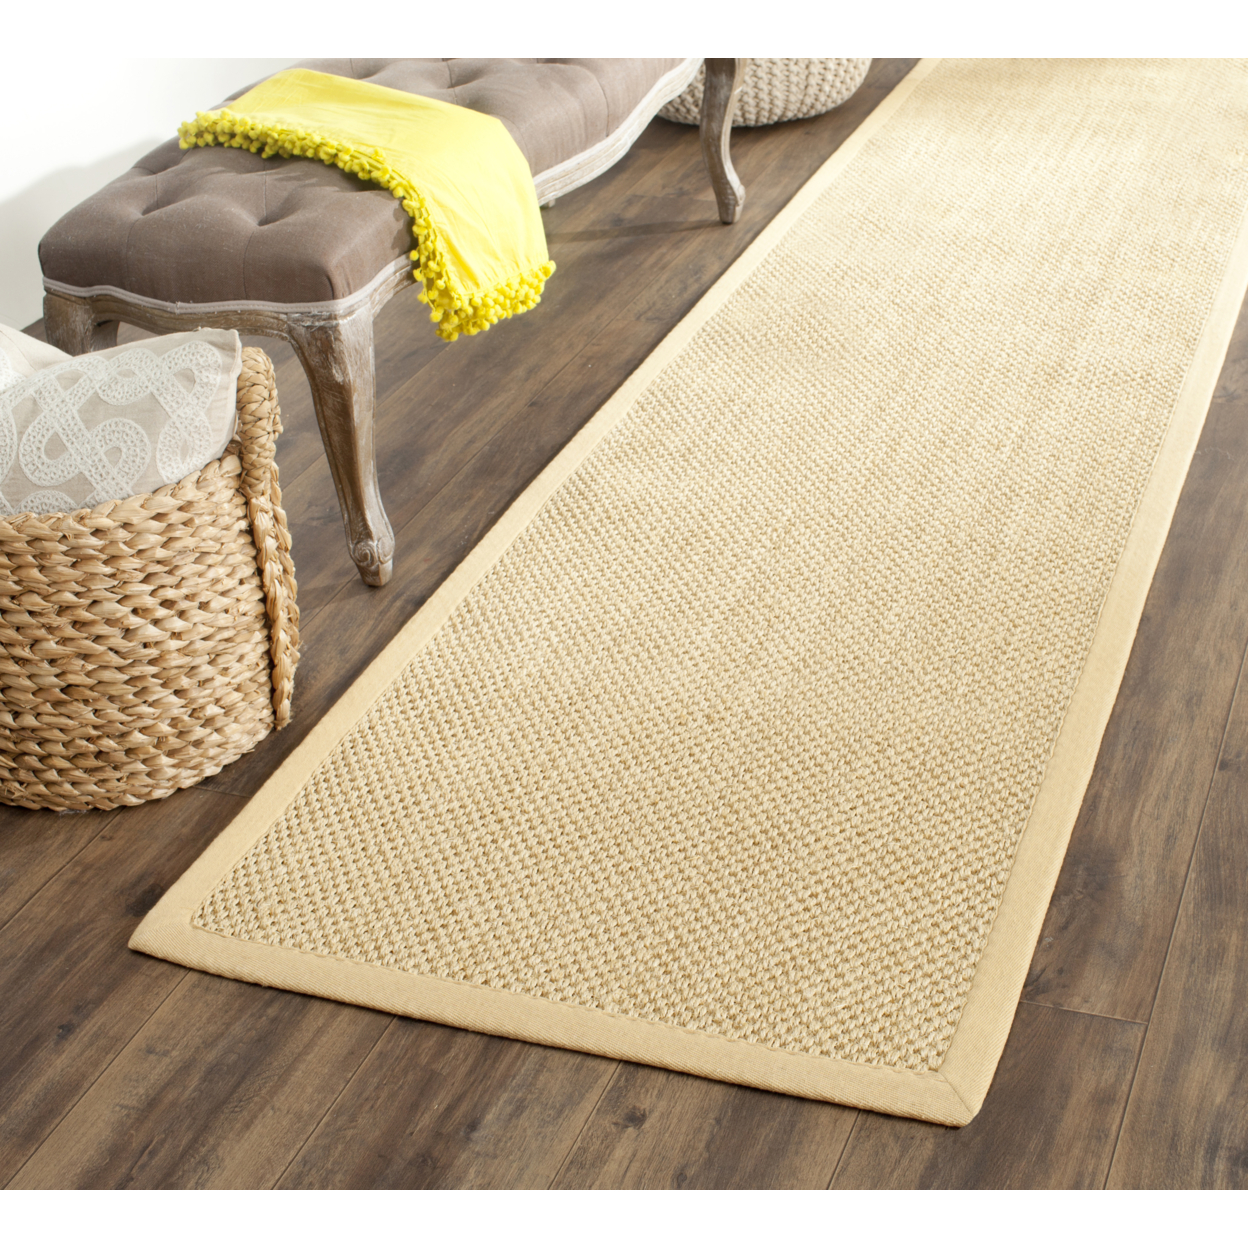 SAFAVIEH Natural Fiber Collection NF443A Maize/Wheat Rug - 3' X 5'